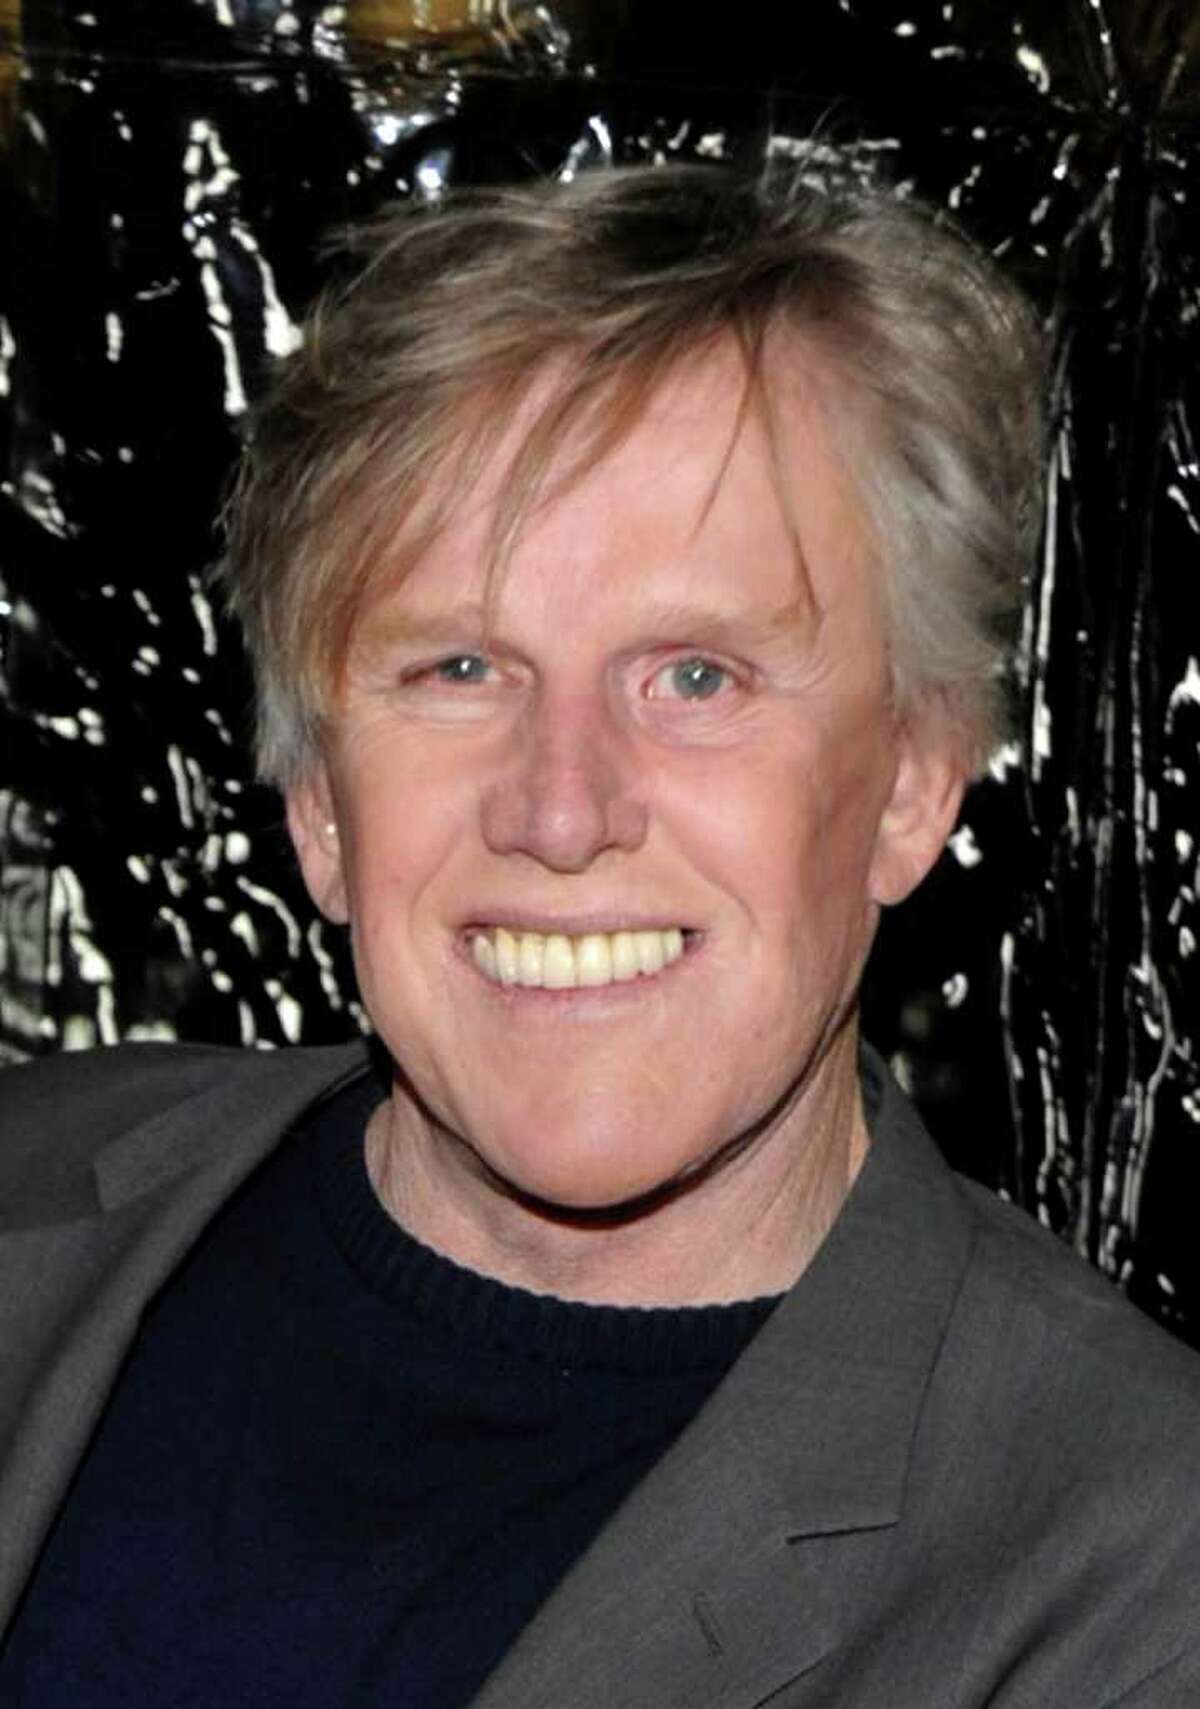 FILE - In this Dec. 8, 2009 file photo, actor Gary Busey arrives at the premiere of the feature film "Crazy Heart" in Beverly Hills, Calif. Busey filed for bankruptcy Tuesday in Los Angeles, citing more than $500,000 in estimated debts. (AP Photo/Dan Steinberg, file)